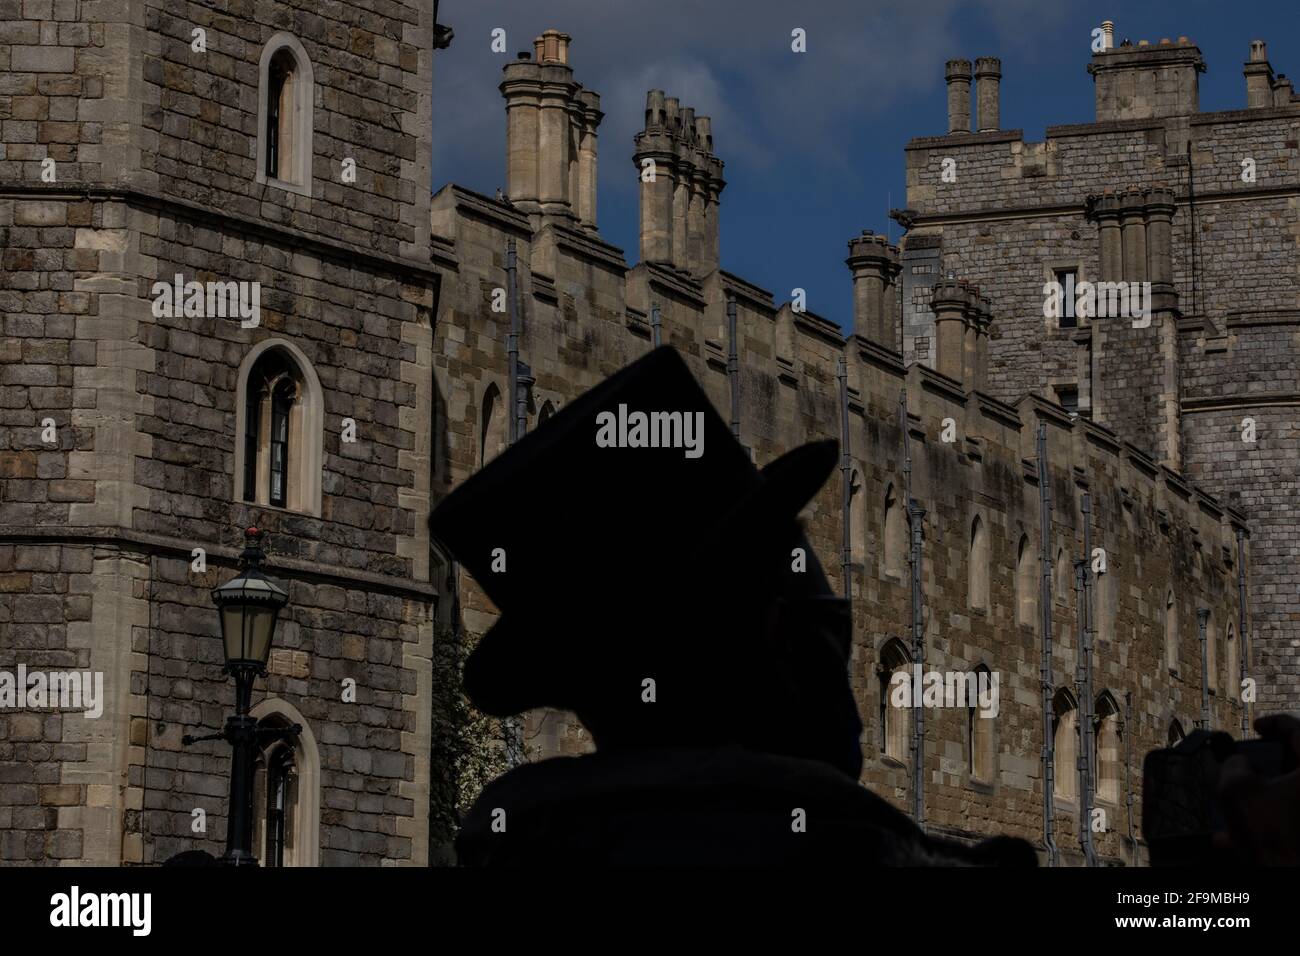 Man silhouetted wearing a Top Hat during UK Royal Funeral in Windsor: The build up to Duke of Edinburgh's Funeral in Windsor, Berkshire, England, UK Stock Photo